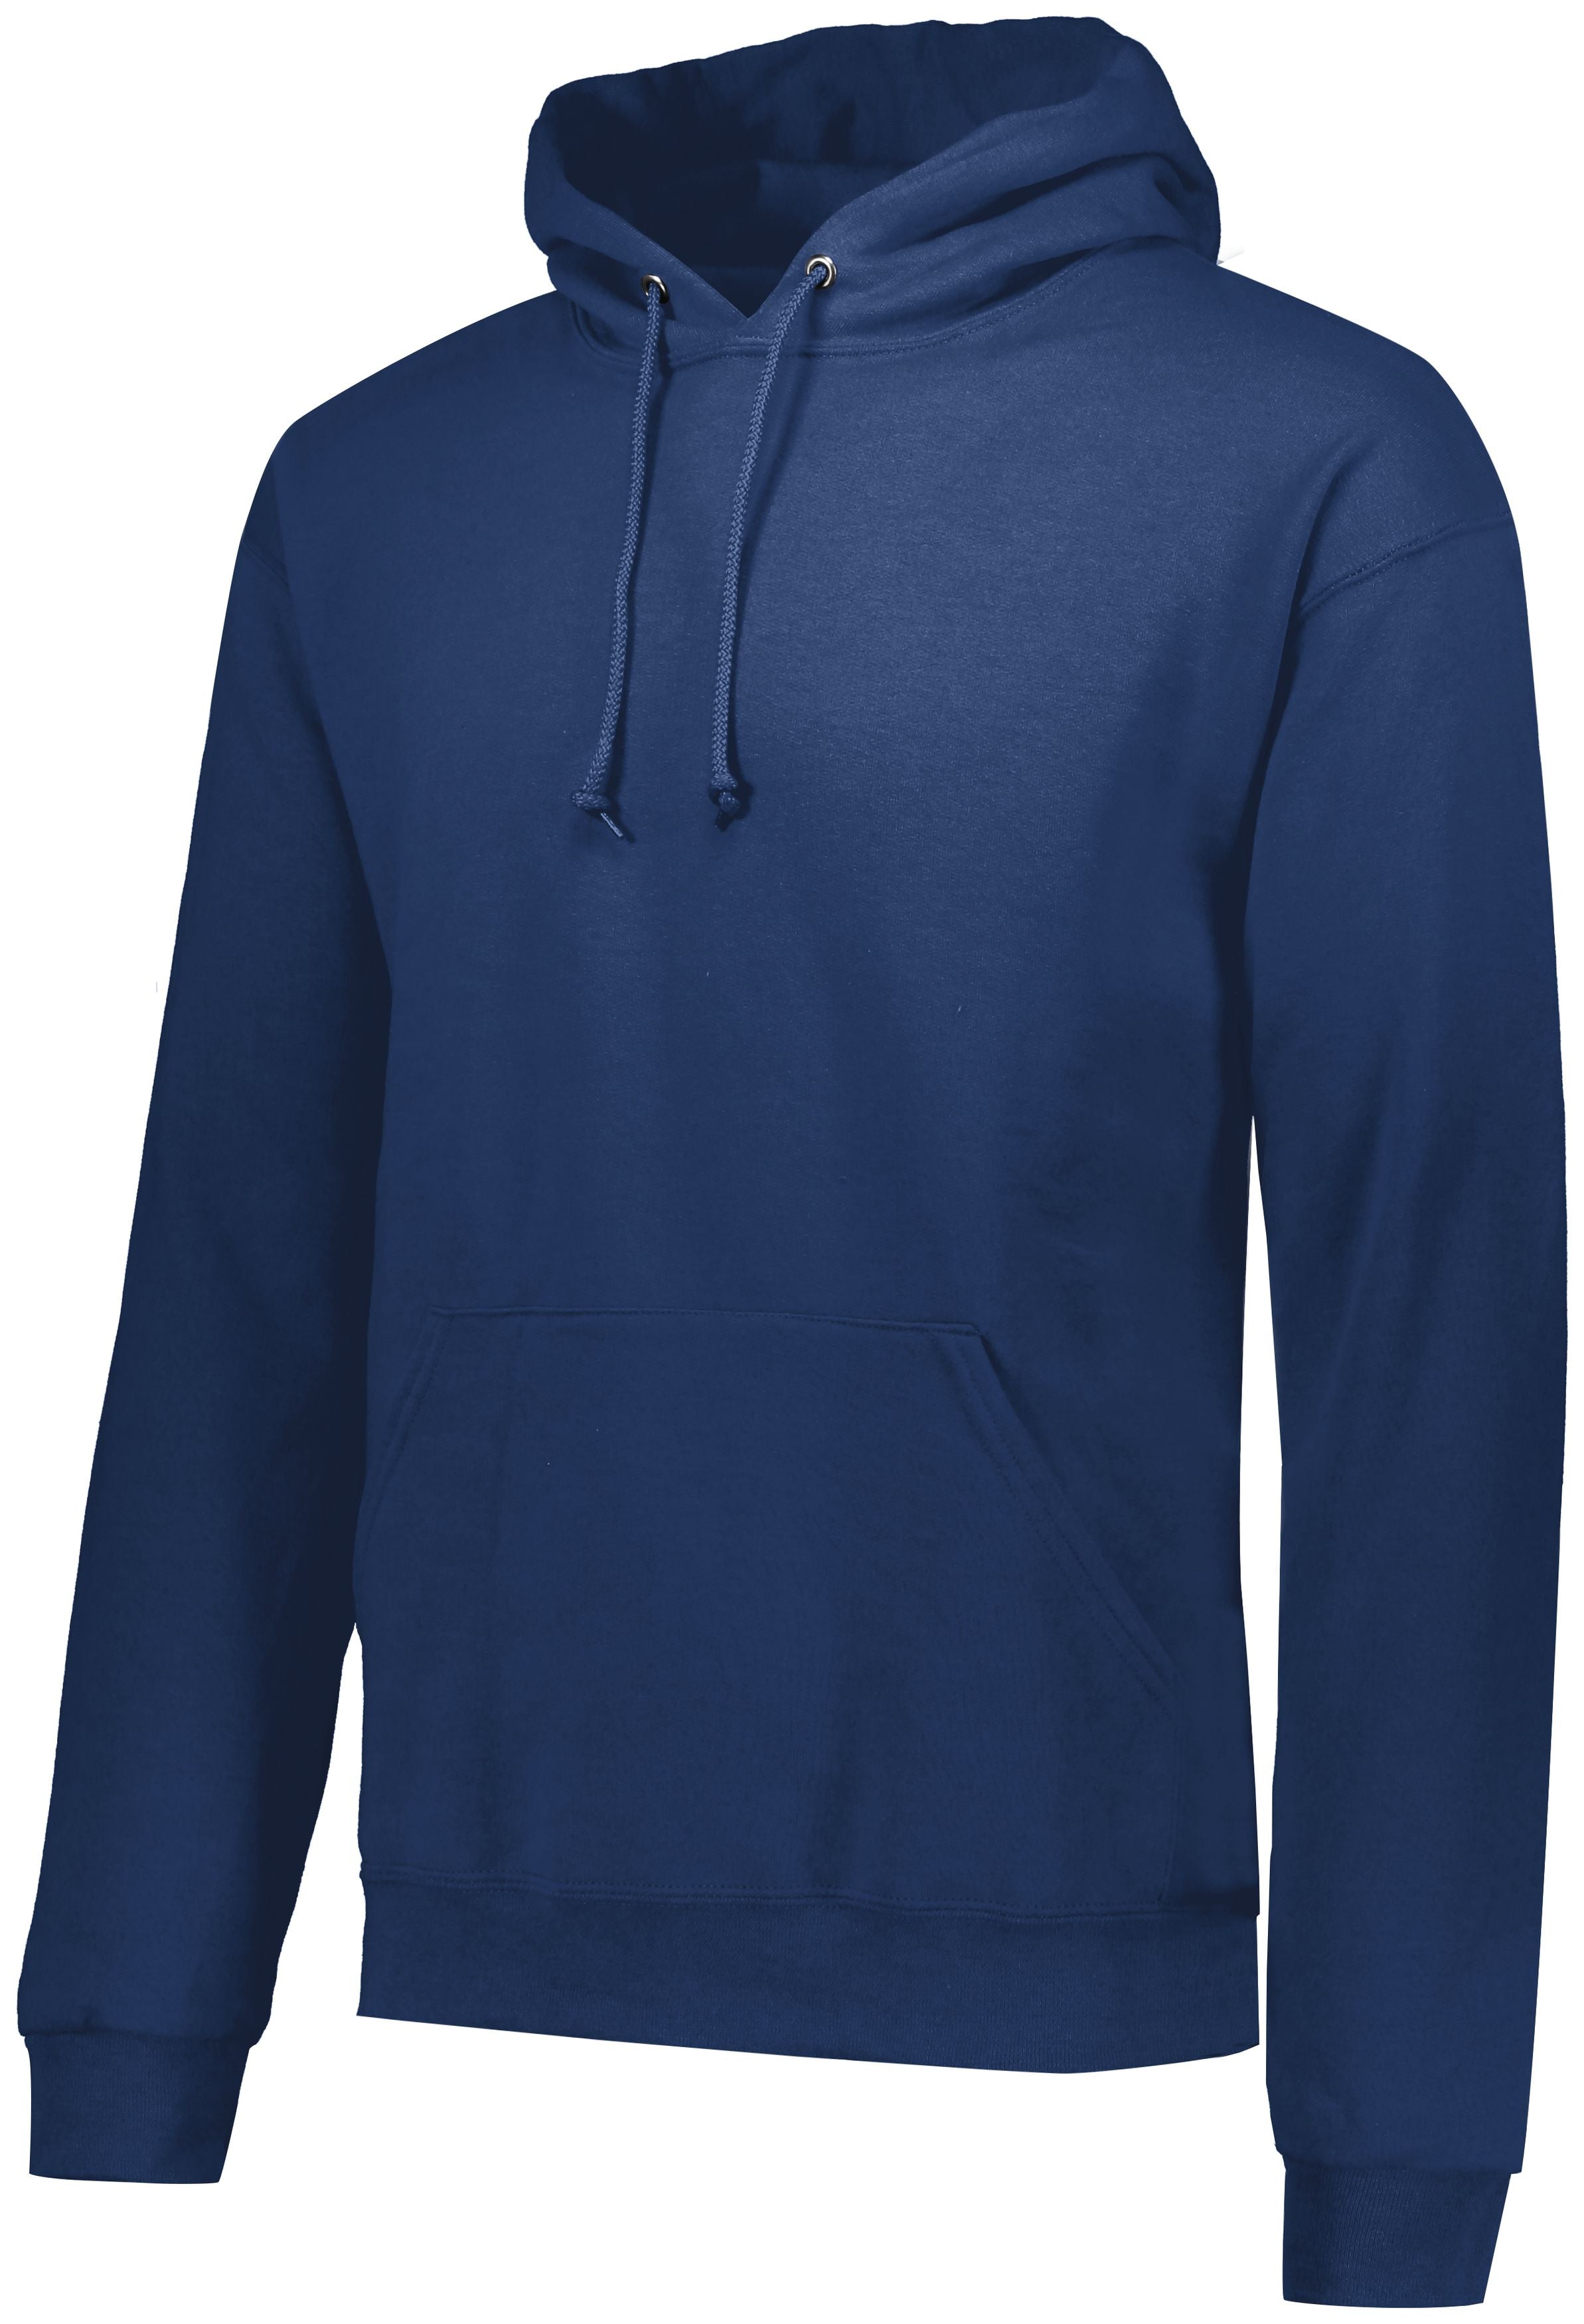 Russell Athletic Jerzees 50/50 Hoodie in Navy  -Part of the Adult, Russell-Athletic-Products, Shirts product lines at KanaleyCreations.com